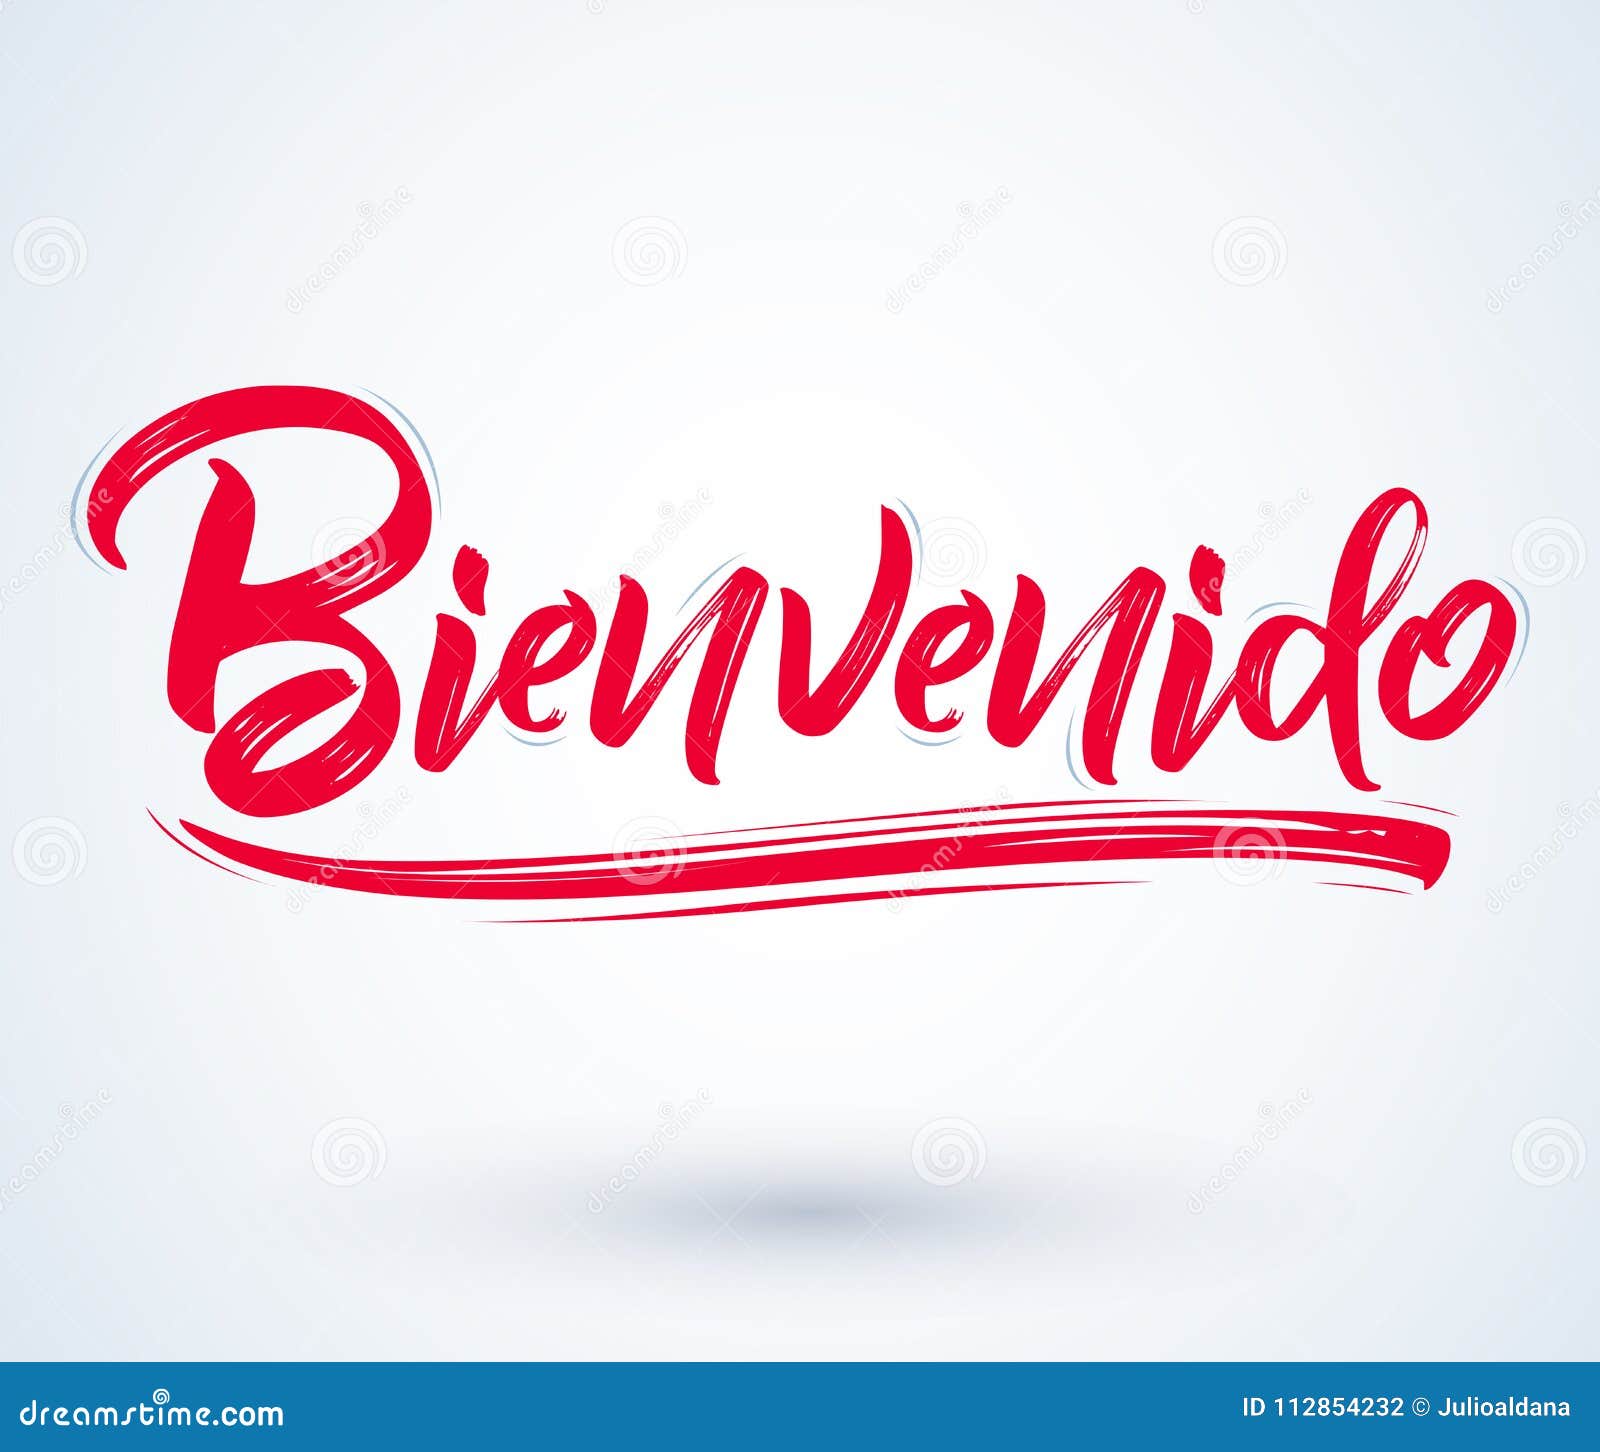 Bienvenido Welcome Spanish Text Lettering Vector: immagine vettoriale stock  (royalty free) 146506775